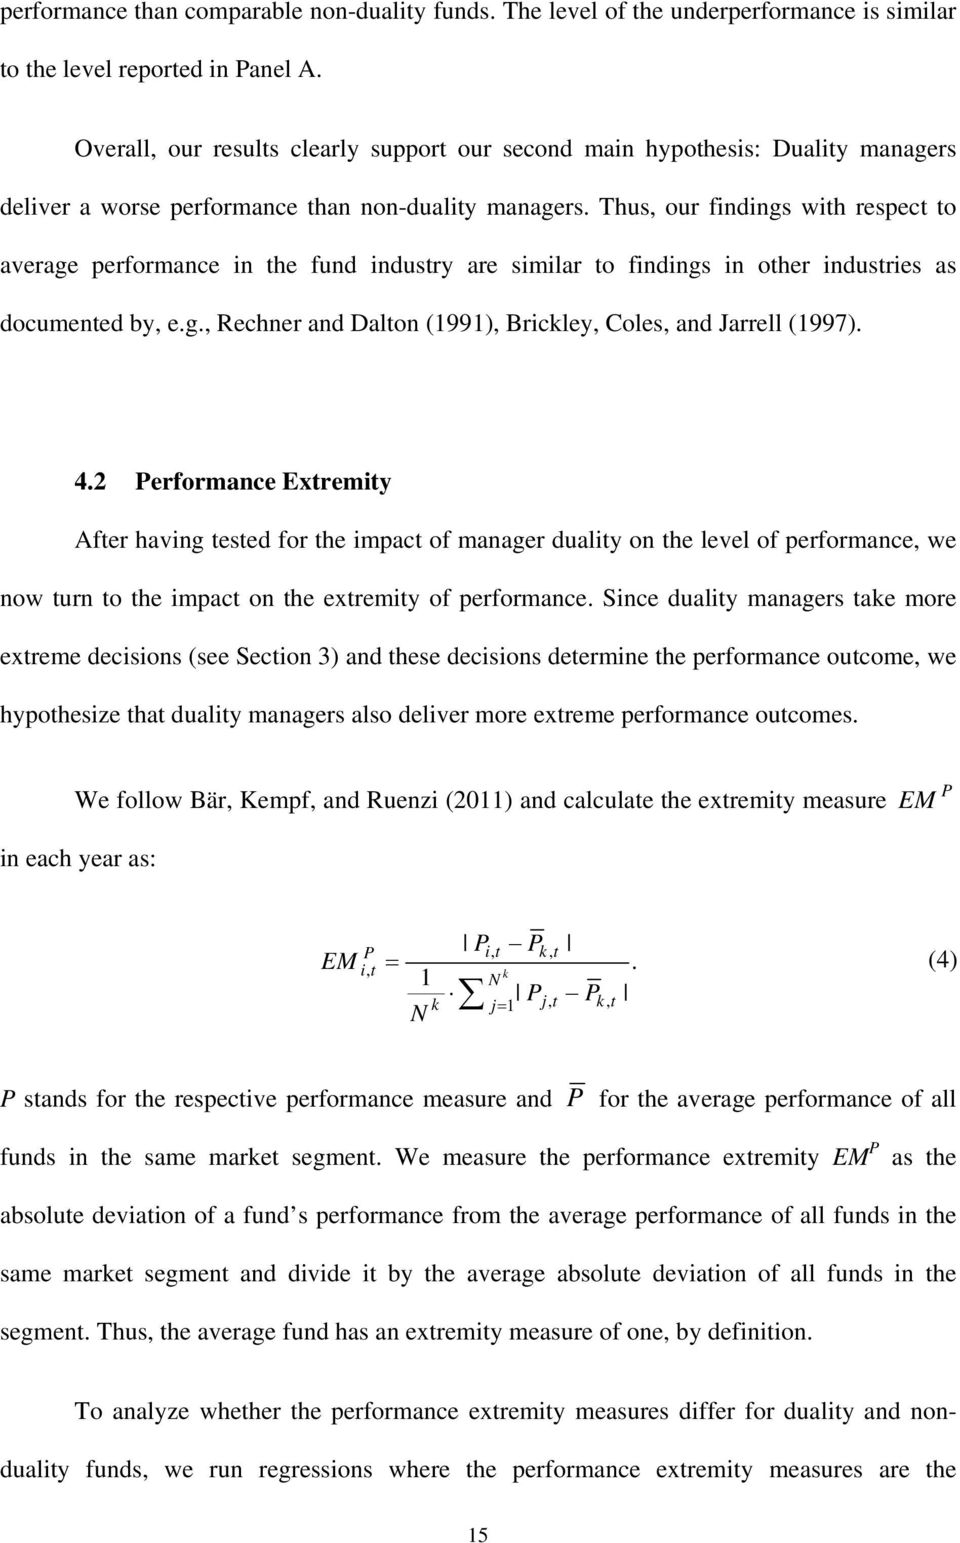 Thus, our findings with respect to average performance in the fund industry are similar to findings in other industries as documented by, e.g., Rechner and Dalton (1991), Brickley, Coles, and Jarrell (1997).